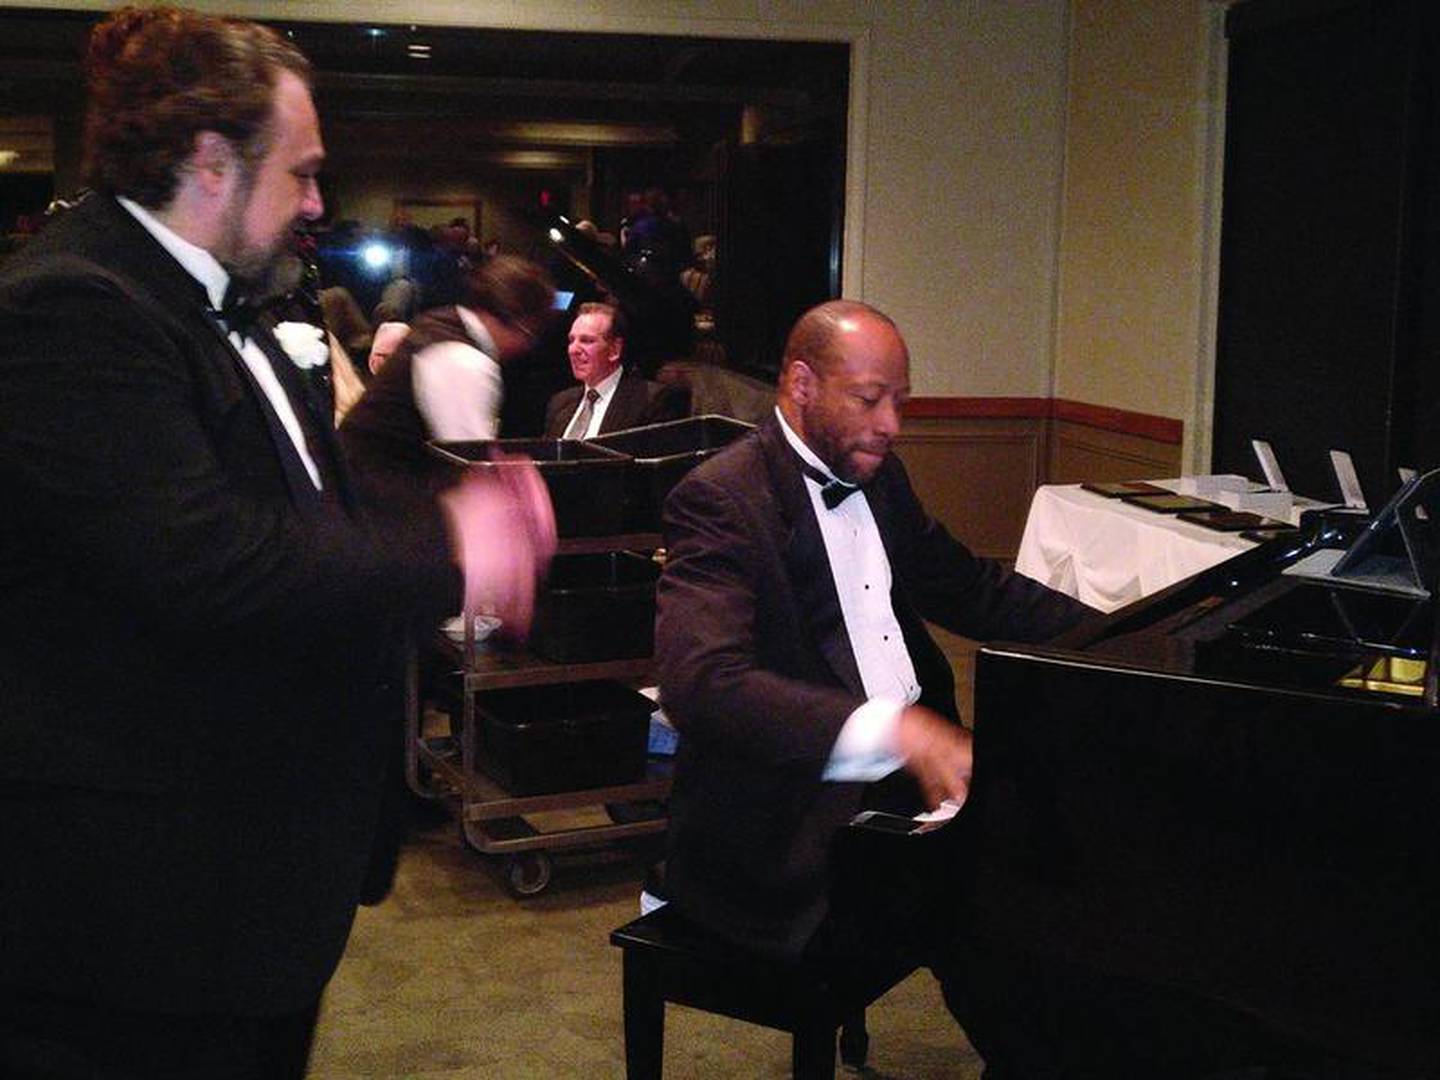 [Pianist Huntley Brown, a previous inductee in the Fox Valley Arts Hall of Fame, entertains the audience. Operatic tenor Franco Martorana (left) also performed, accompanied by pianist Murna Hansemann, a board member of the Fox Valley Arts Hall of Fame who chaired the banquet.]

"I'm just glad I had so many opportunities to financially support many organizations," said Ainsworth, long associated as a singer with area choral groups.

The second inductee was Bobbie Brown of St. Charles, a visual artist.

"I'm truly humbled to be among those you have chosen," Brown said.

She remembered a time before she had a home studio, when she painted at the dining room table. There, immersed in her art, Brown said she would lose track of time, and appreciated her husband and sons' patient understanding.